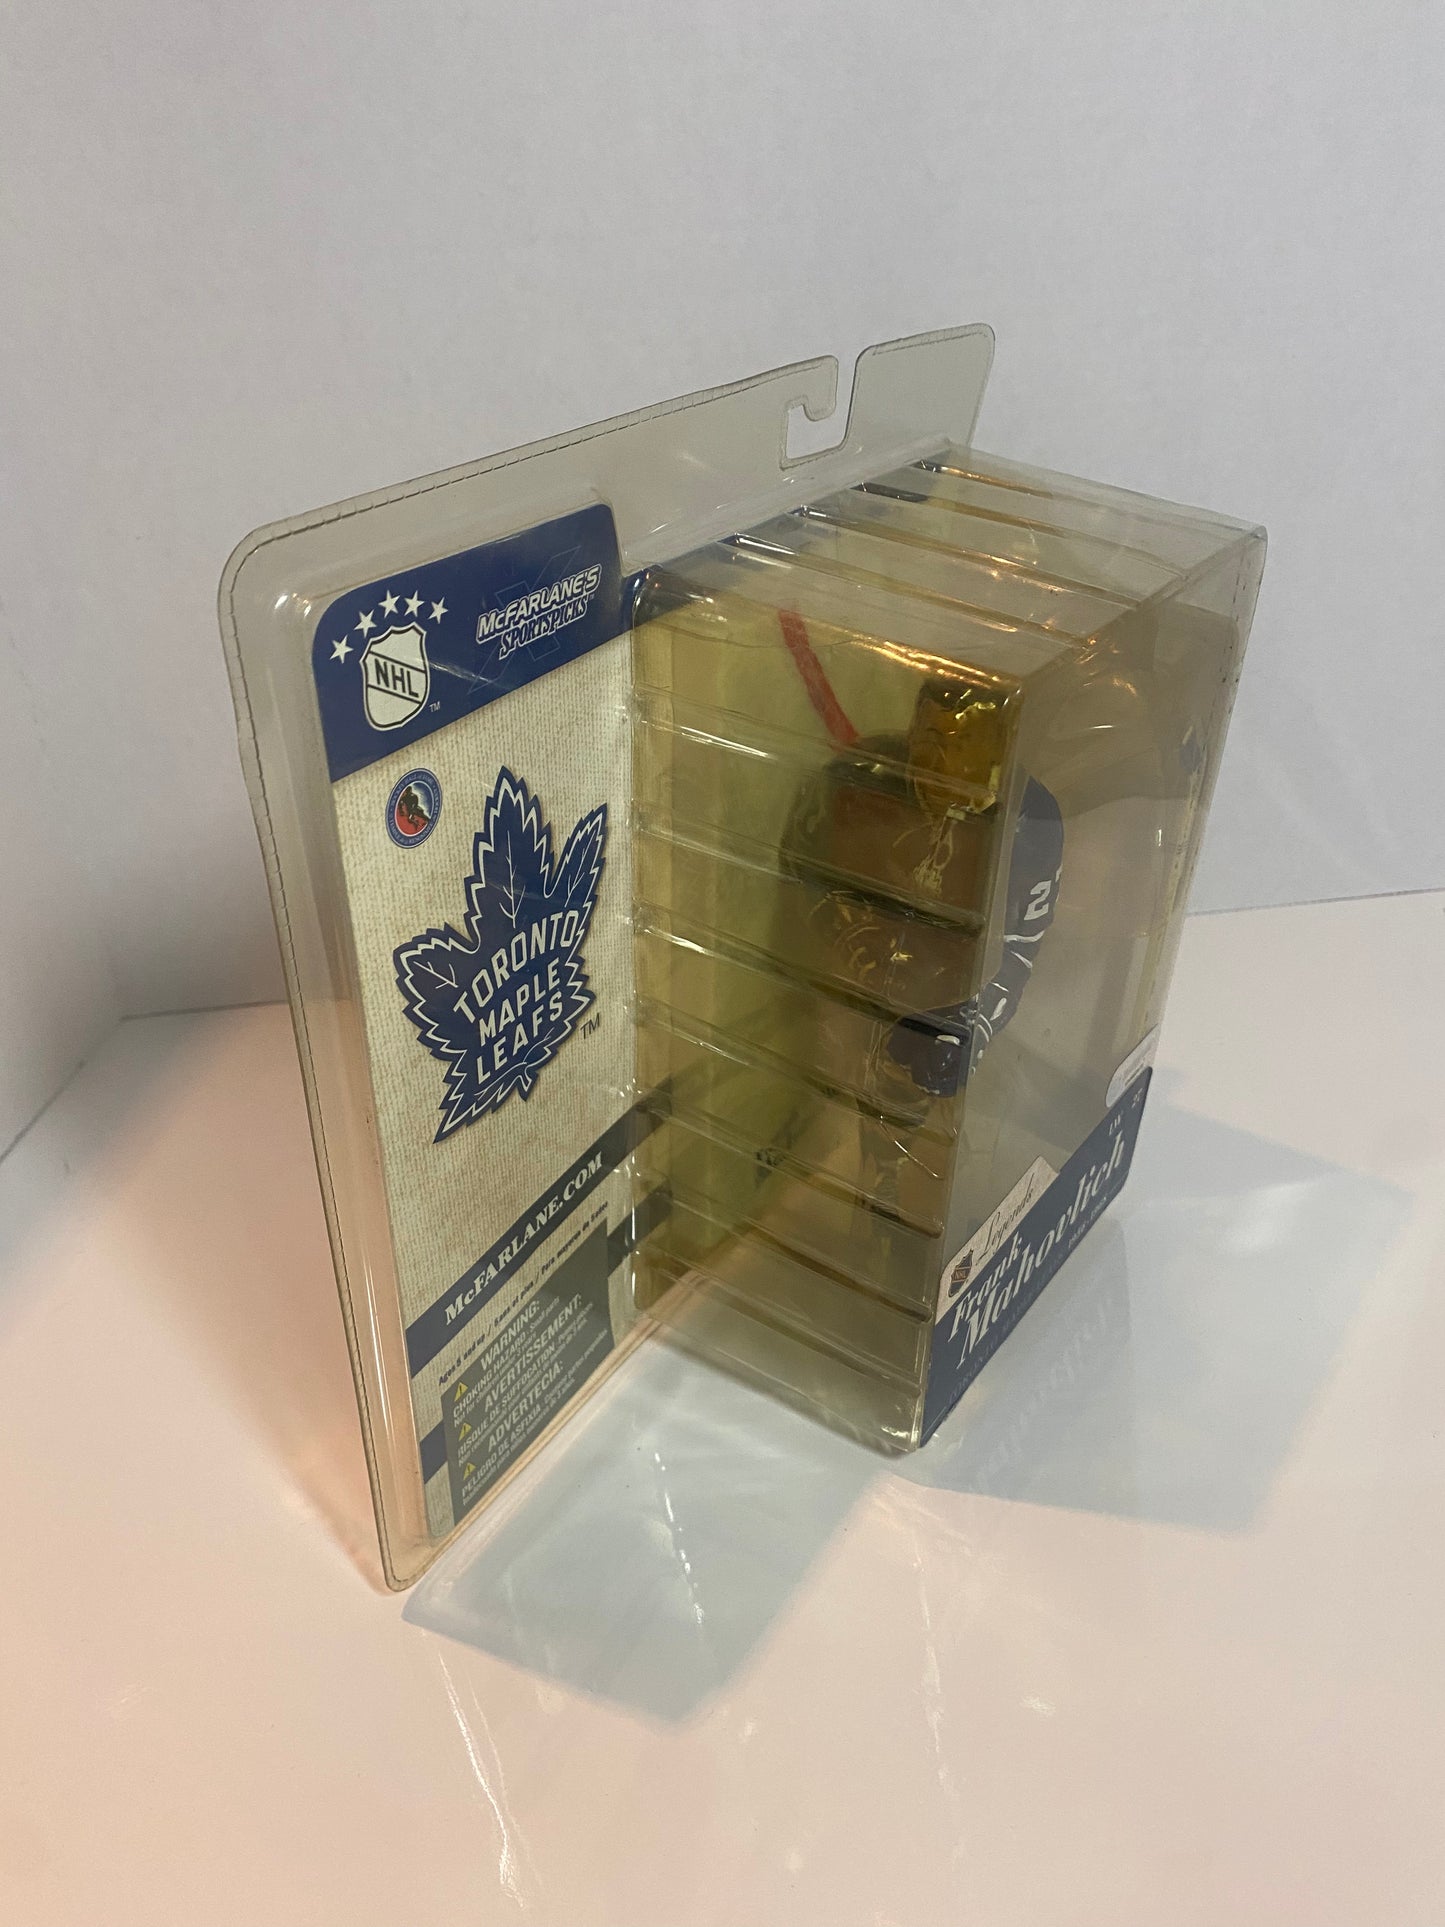 NHL Frank Mohovlich Legends Toronto Maple Leafs